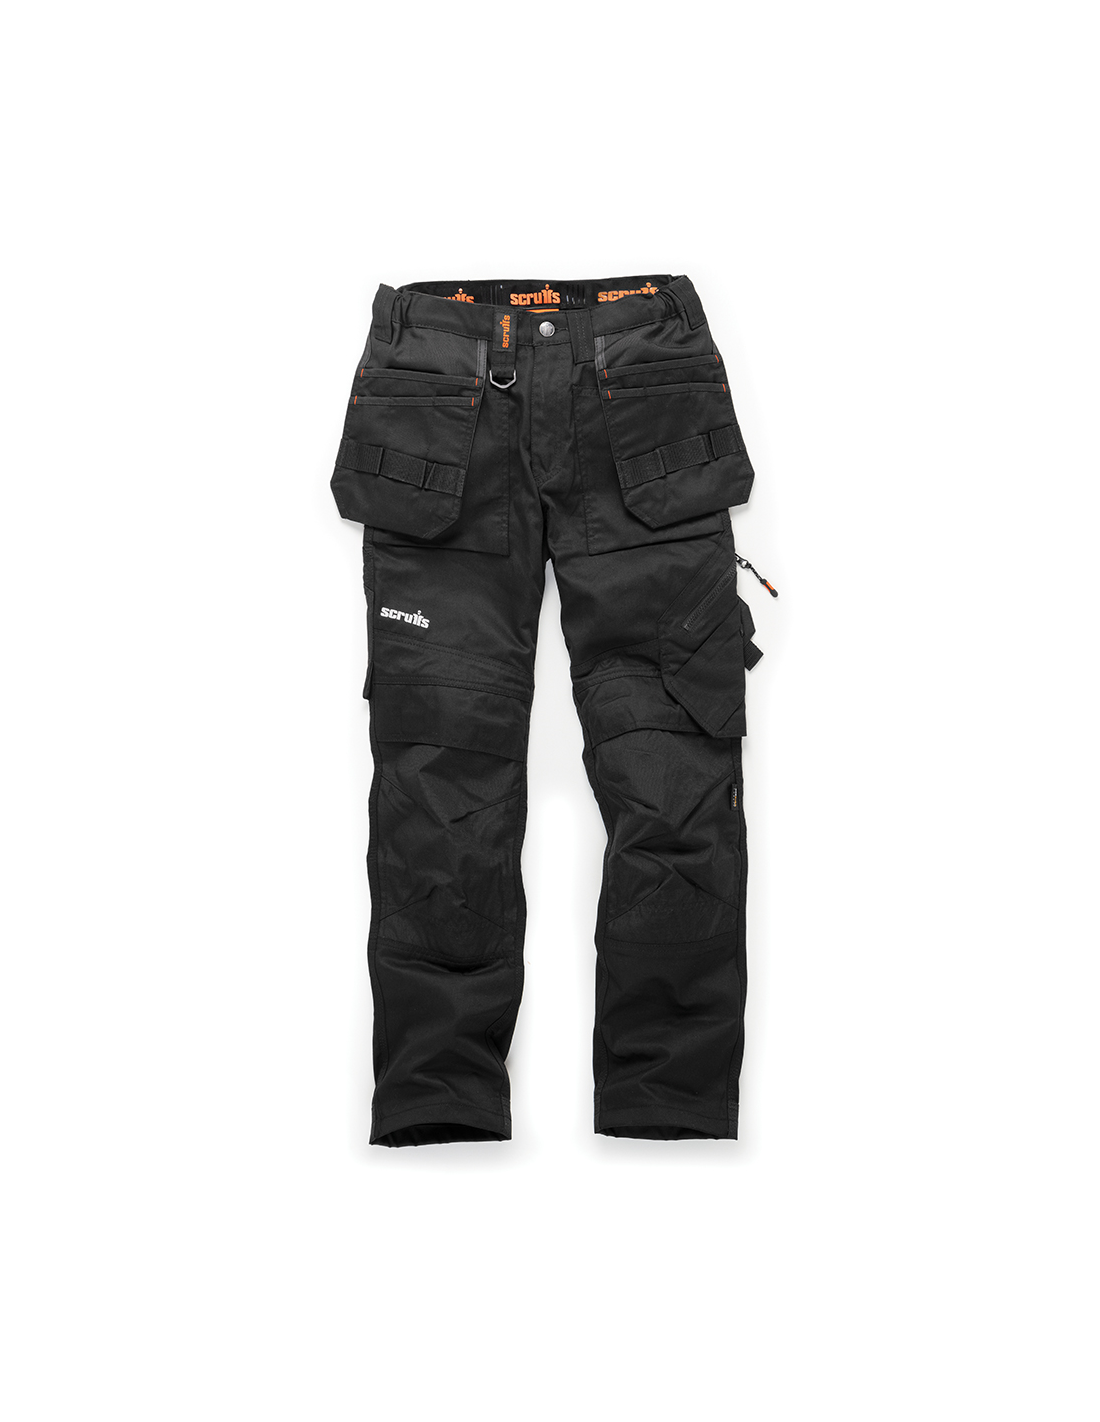 Top more than 67 seal flex waterproof trousers super hot - in.cdgdbentre